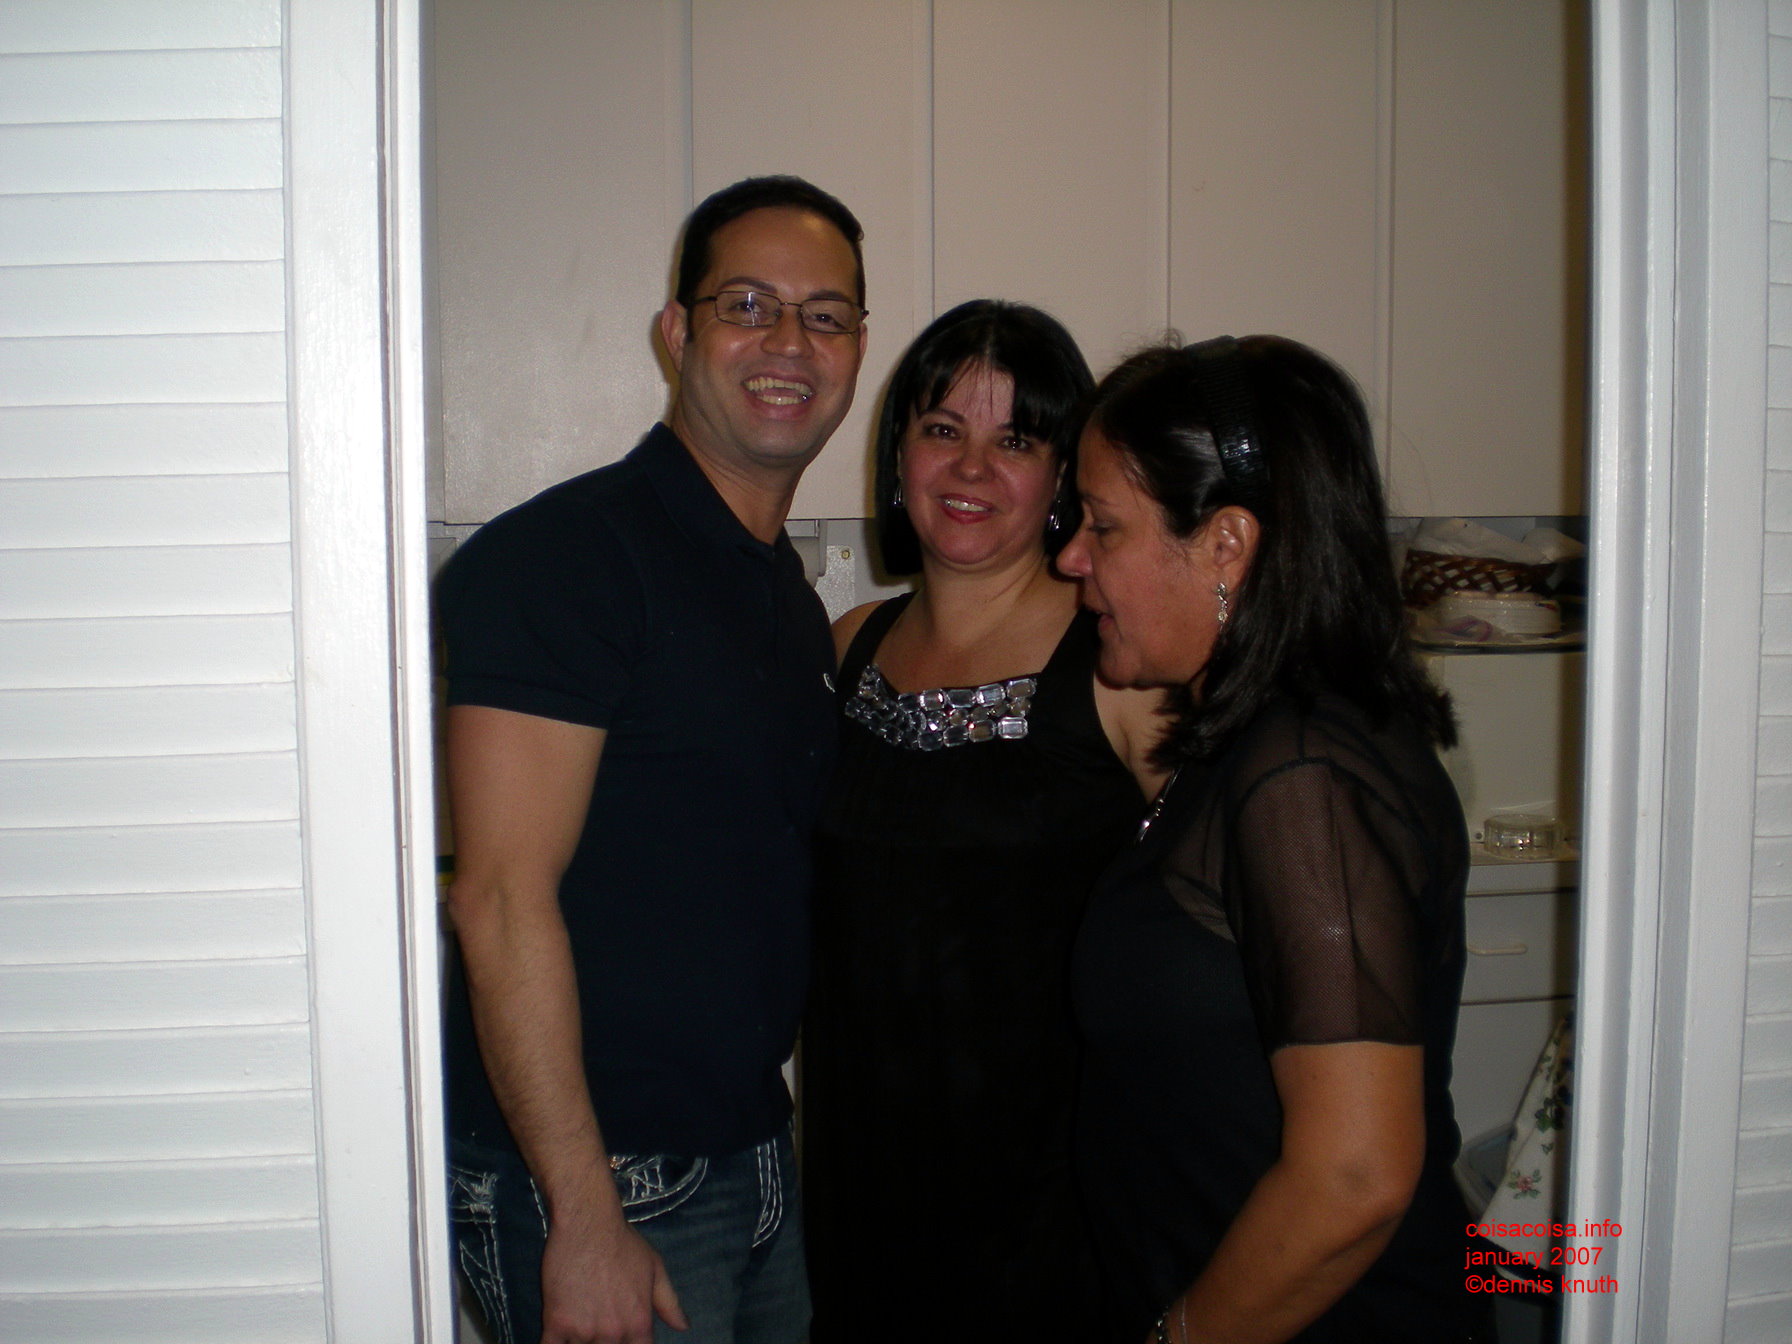 Carlos, Helenice and Heloisa at the party